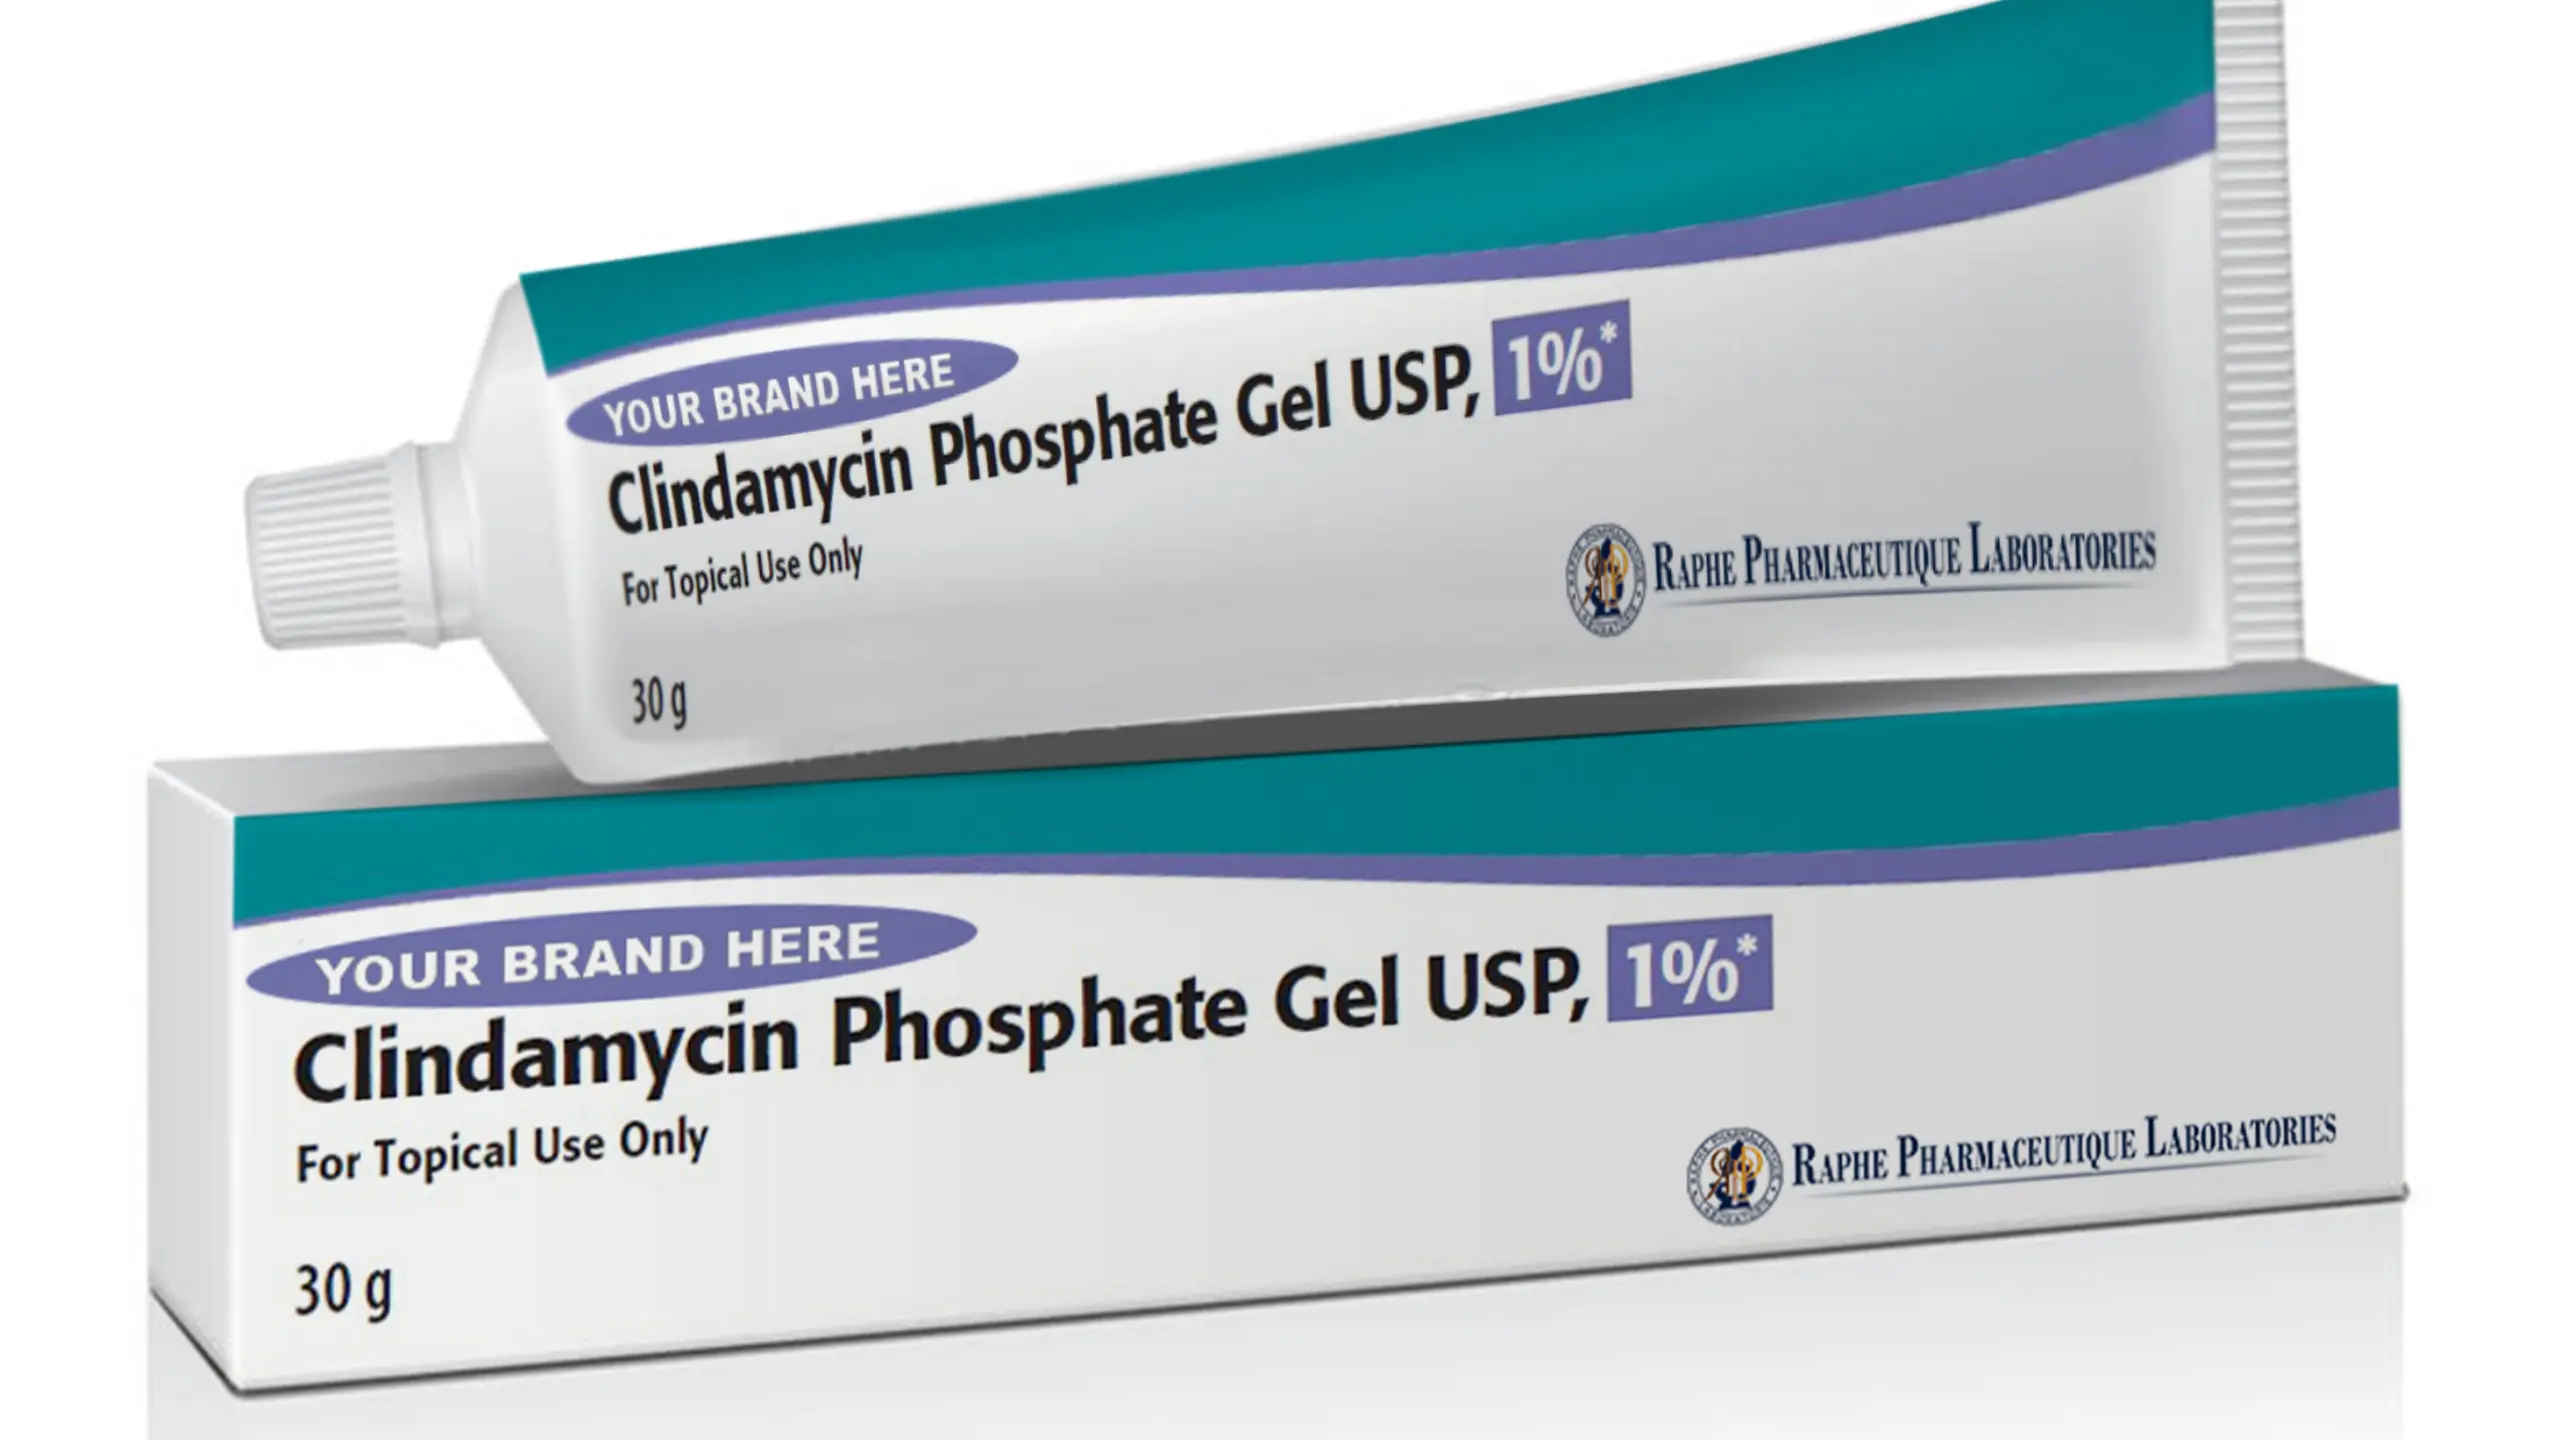 Clindamycin Phosphate its Uses, Dosages, and Side Effects